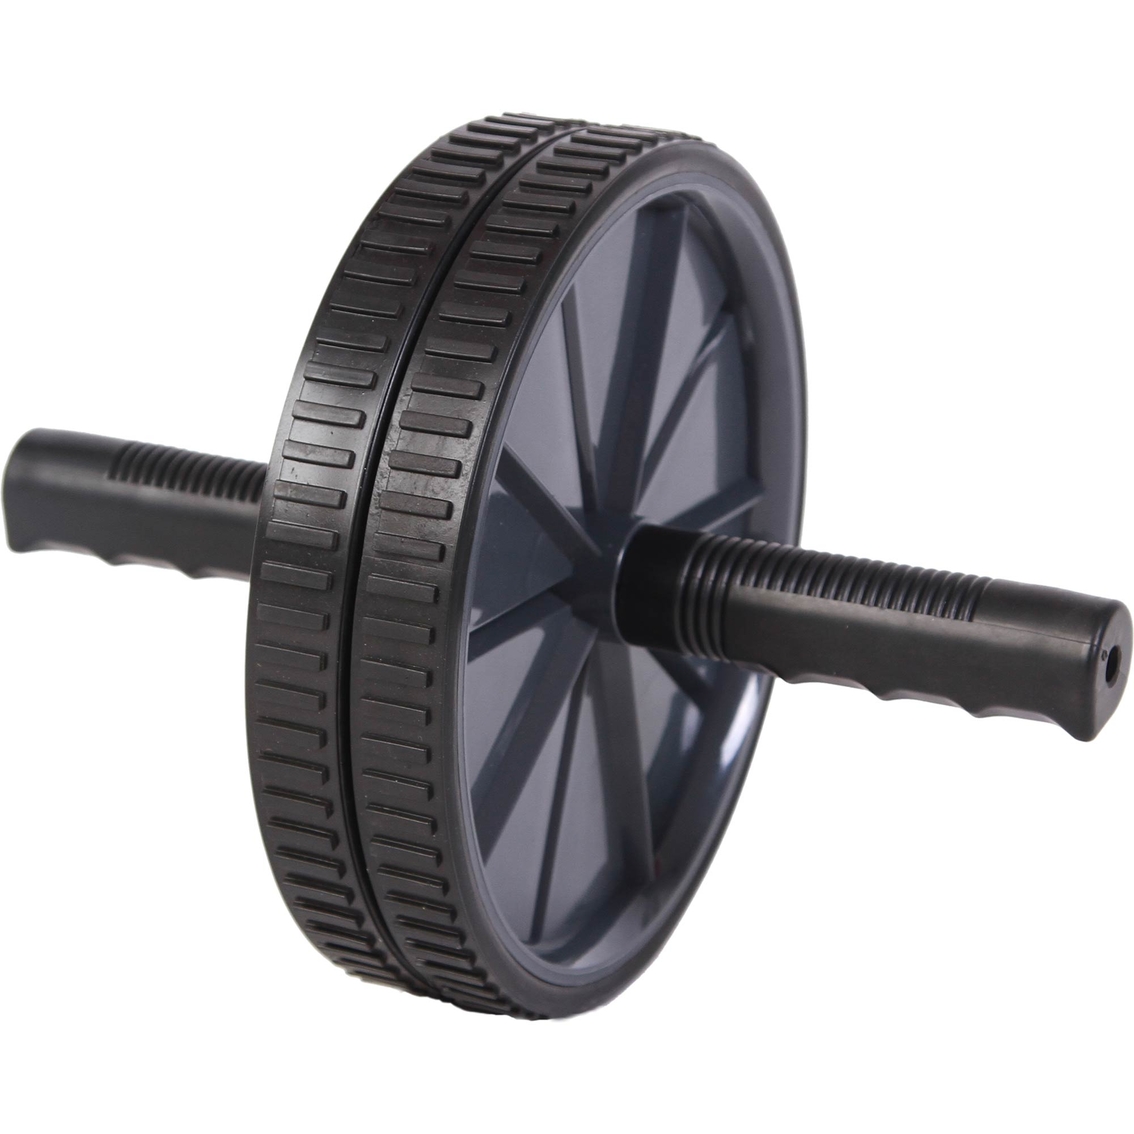 Befit Toning Wheel | Strength Training | Sports & Outdoors | Shop The ...